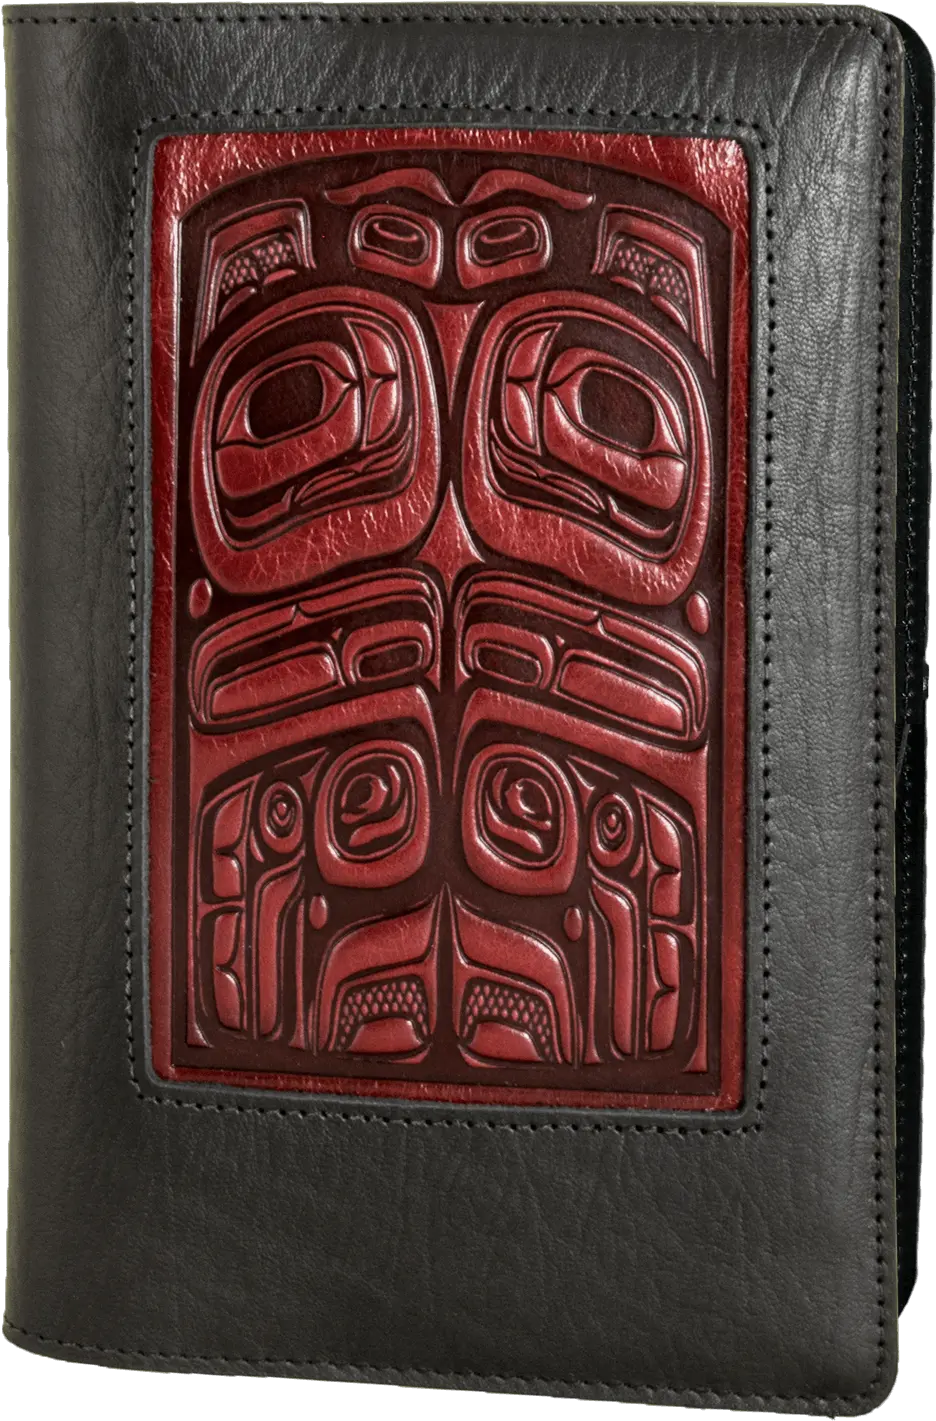 Refillable Leather Icon Journal Covers Hand Crafted In The Solid Png Sort The Data So Cells With The Red Down Arrow Icon